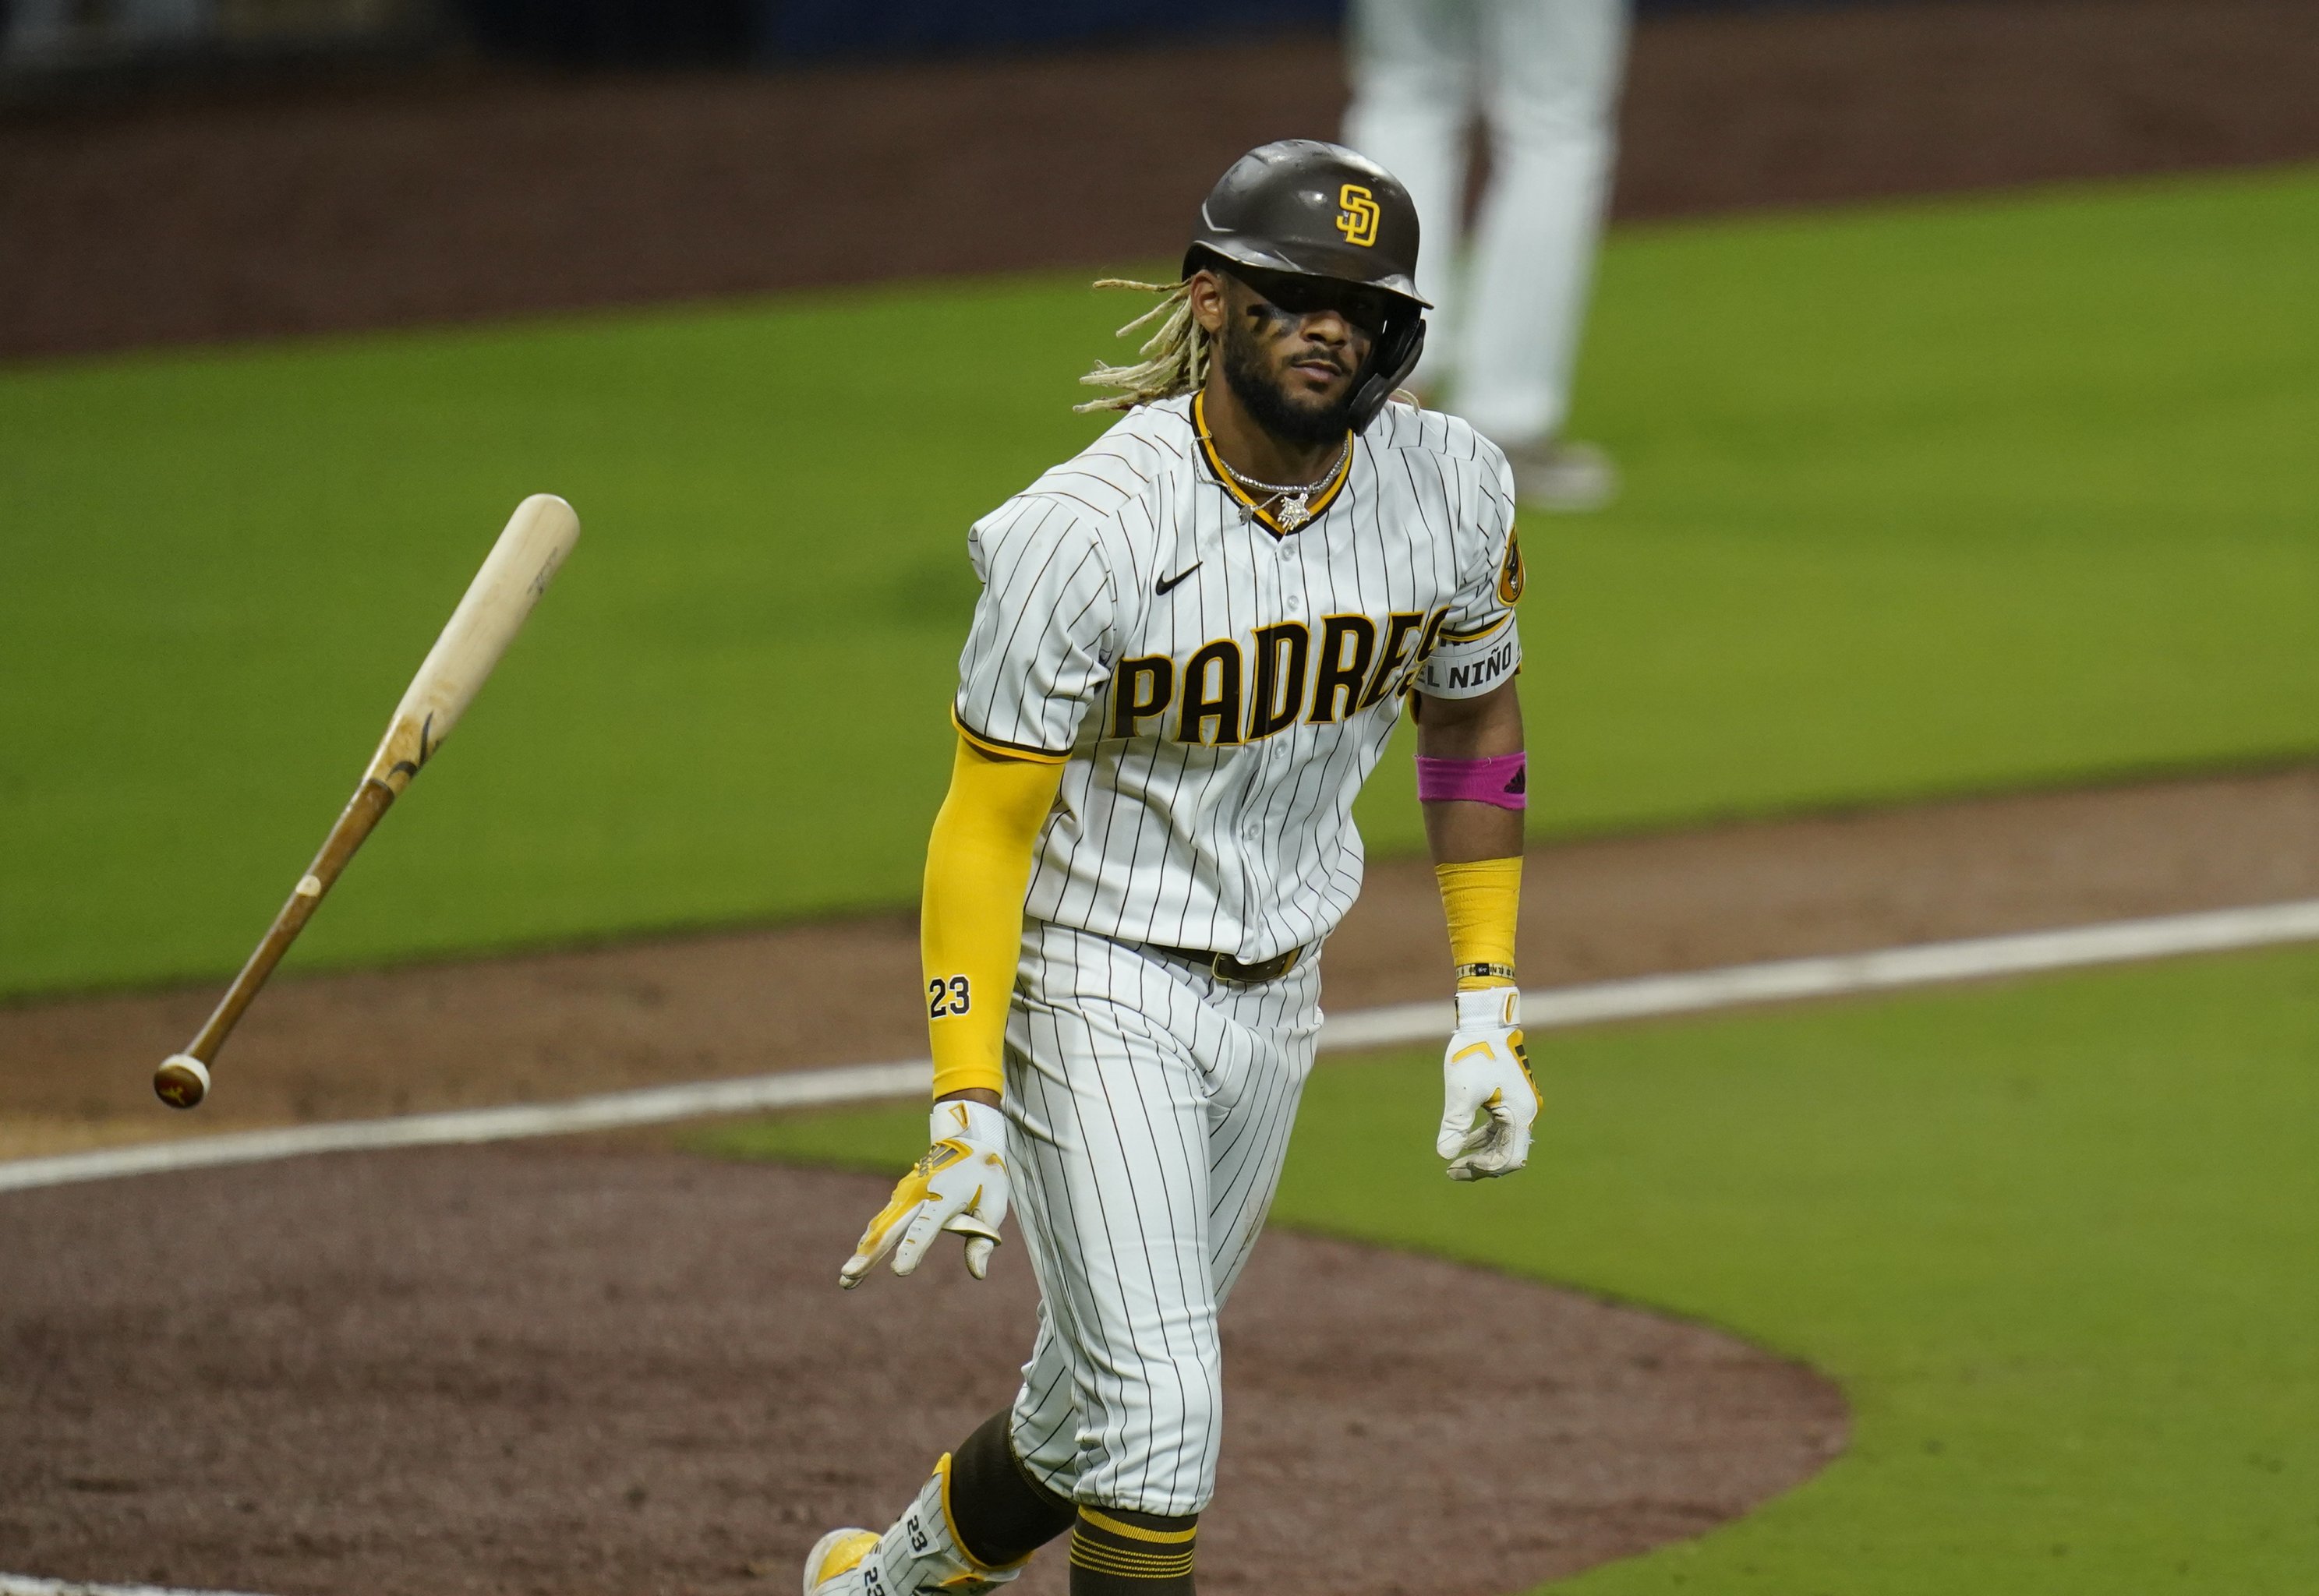 Fernando Tatis Jr.'s contract with Padres shakes up MLB landscape